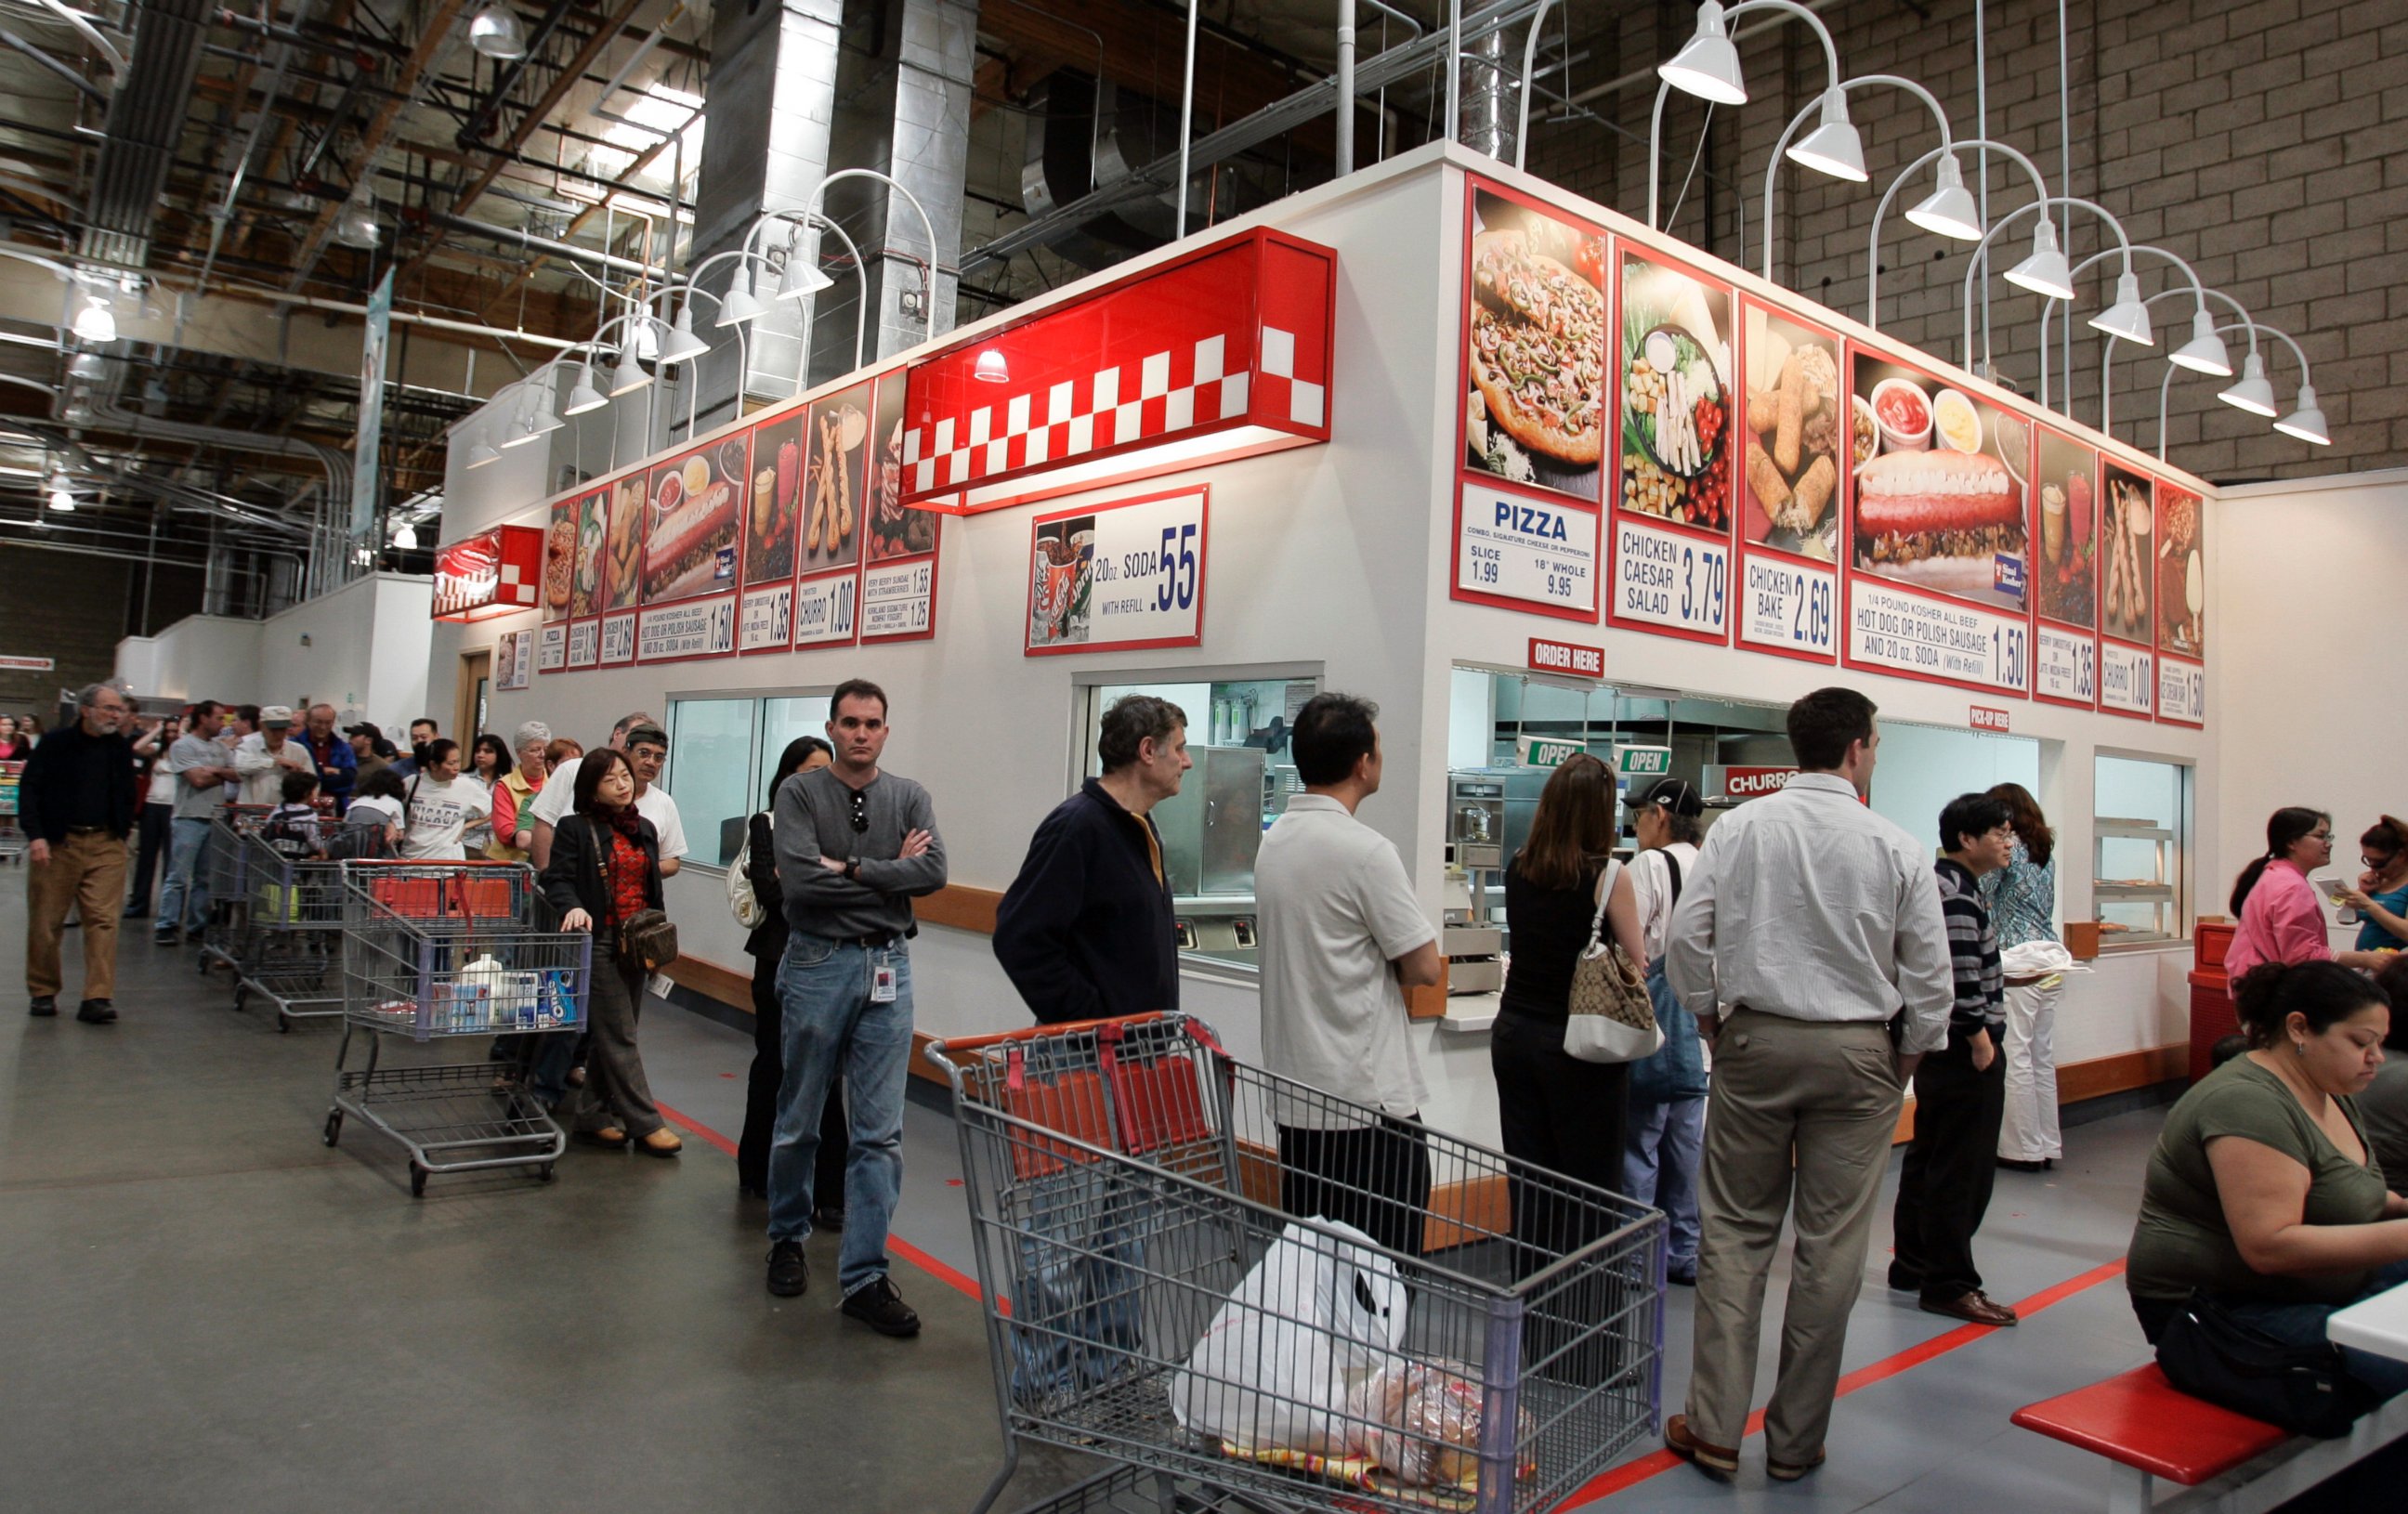 PHOTO: Costco warehouse customers wait in a long line during lunchtime for hot dogs, pizza, and drinks at a Costco store in Mountain View, Calif. on March 6, 2007.